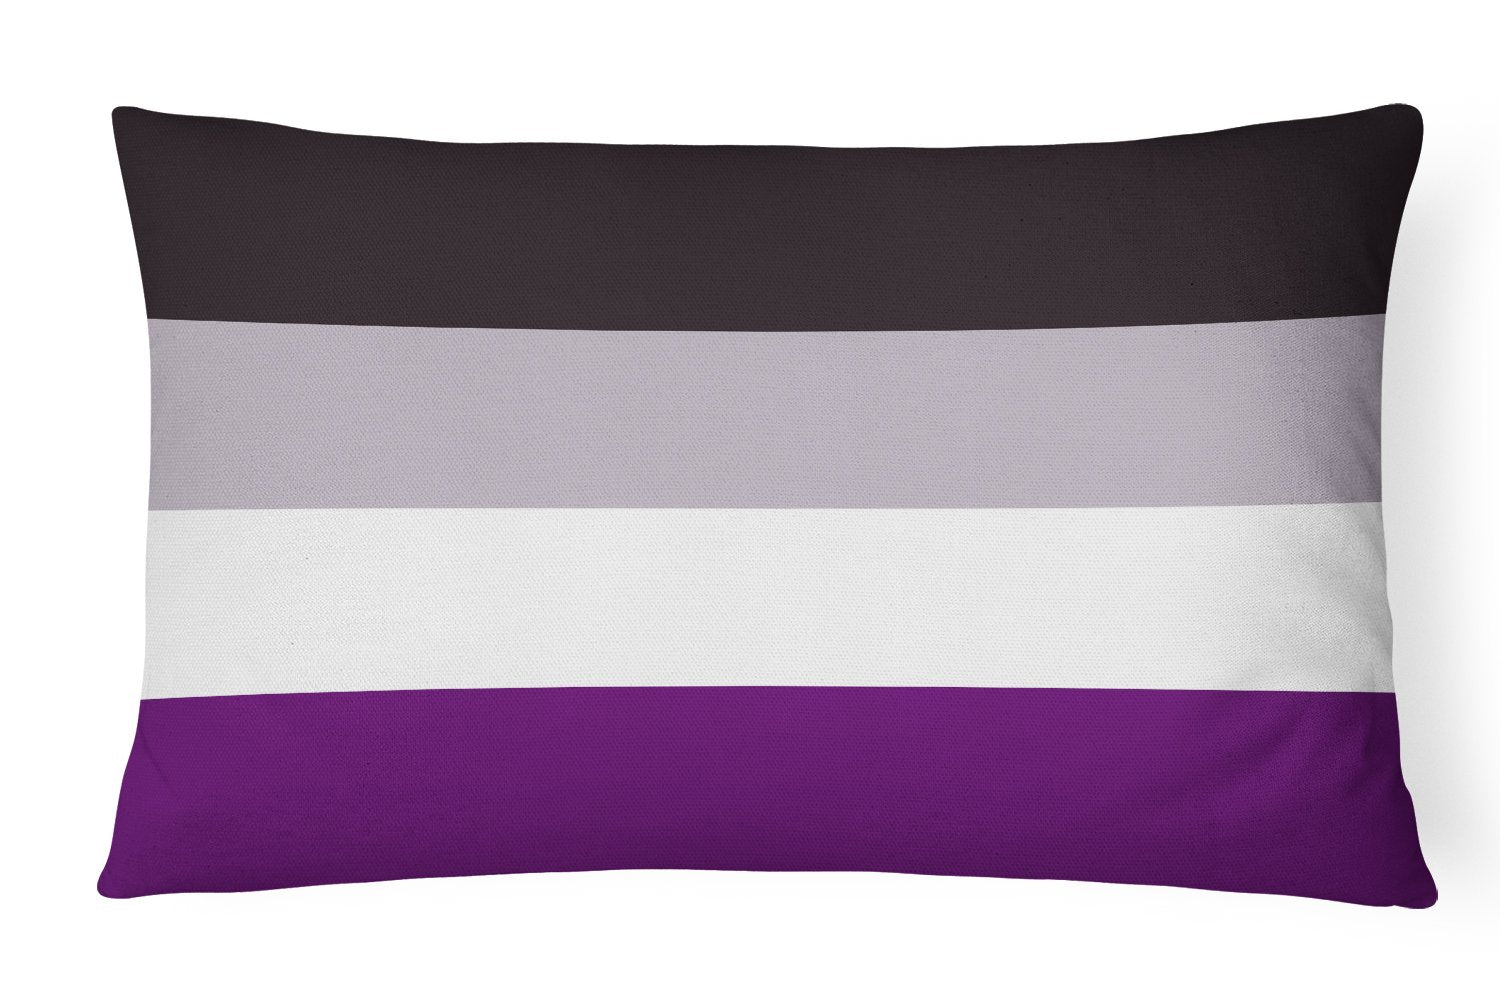 Buy this Asexual Pride Canvas Fabric Decorative Pillow